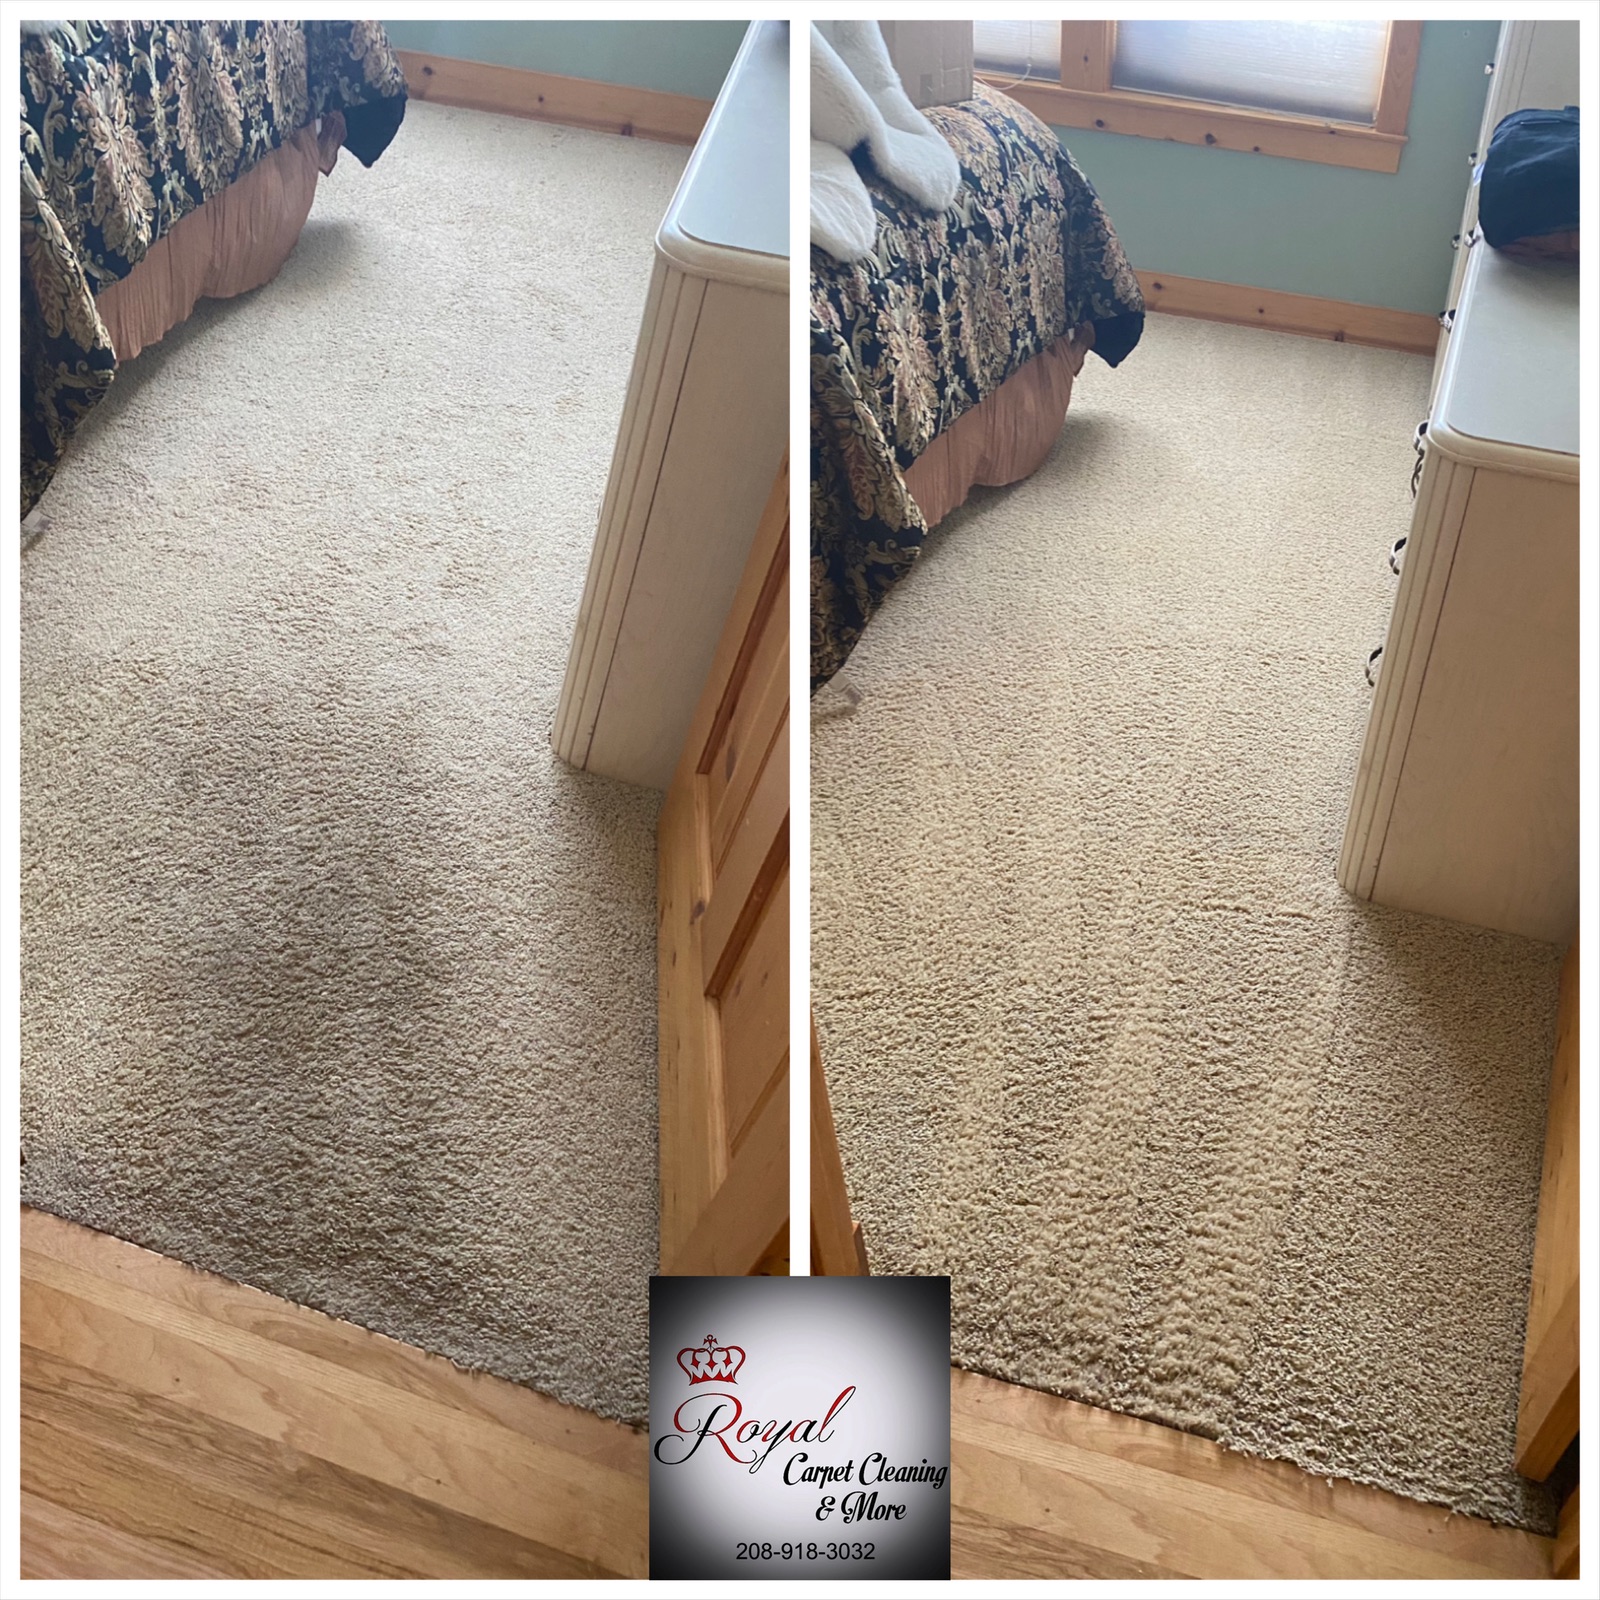 Royal Carpet Cleaning & More